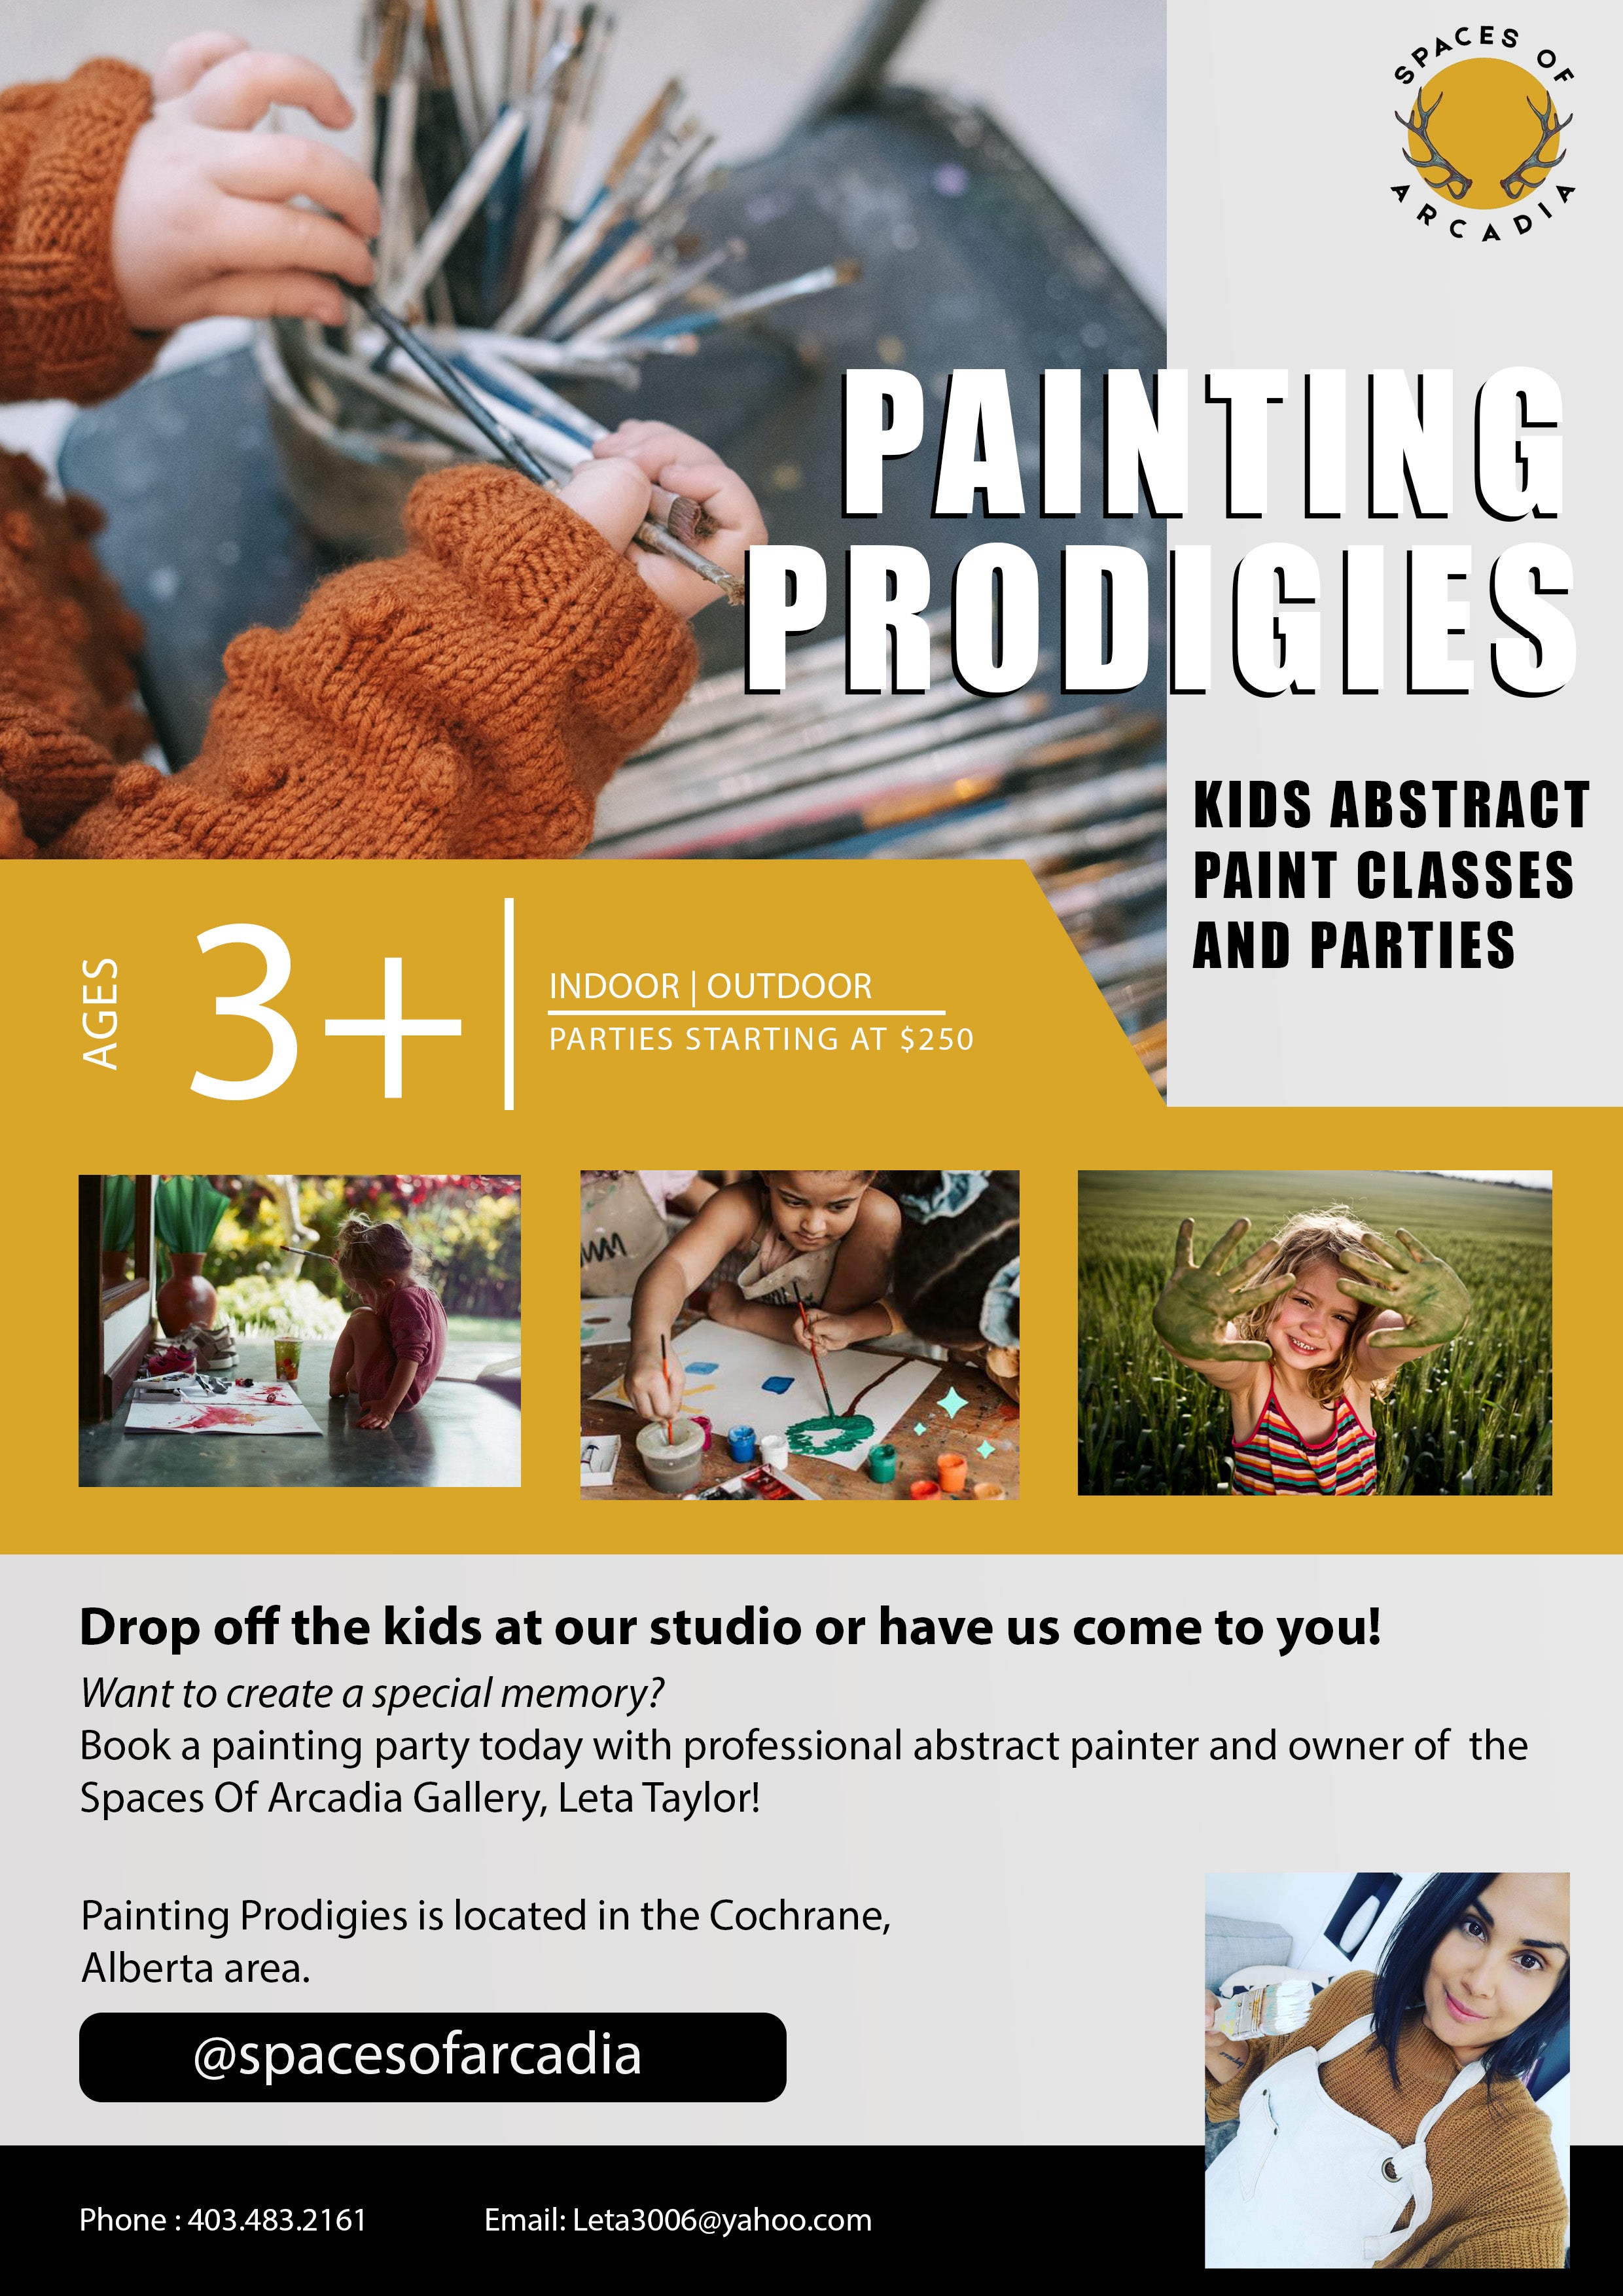 Painting Prodgies Art Class Poster